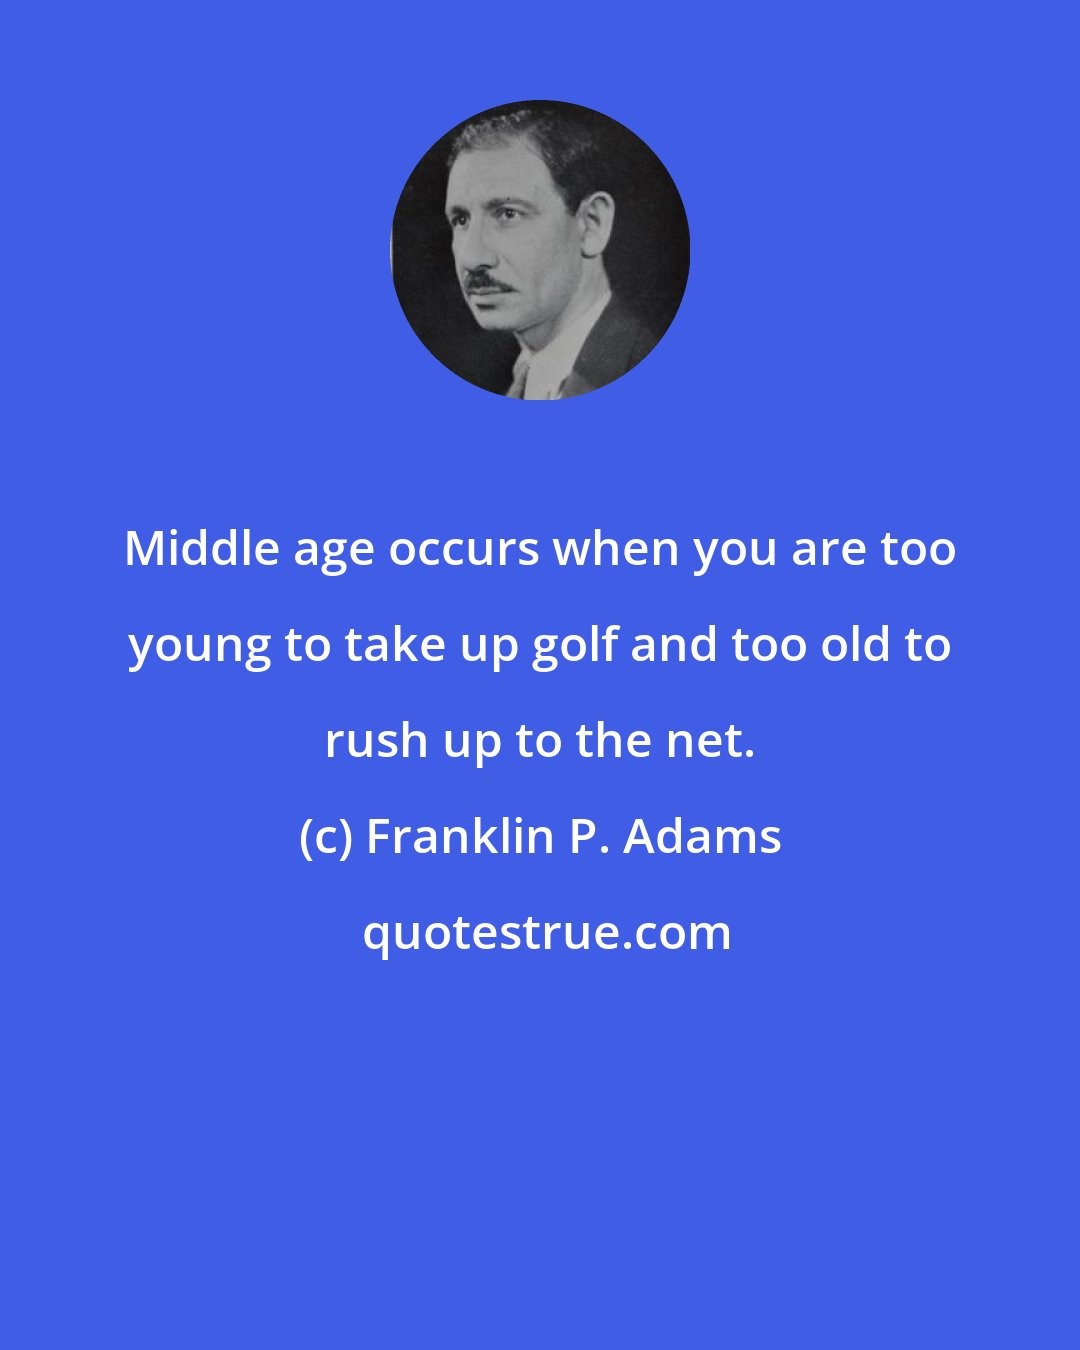 Franklin P. Adams: Middle age occurs when you are too young to take up golf and too old to rush up to the net.